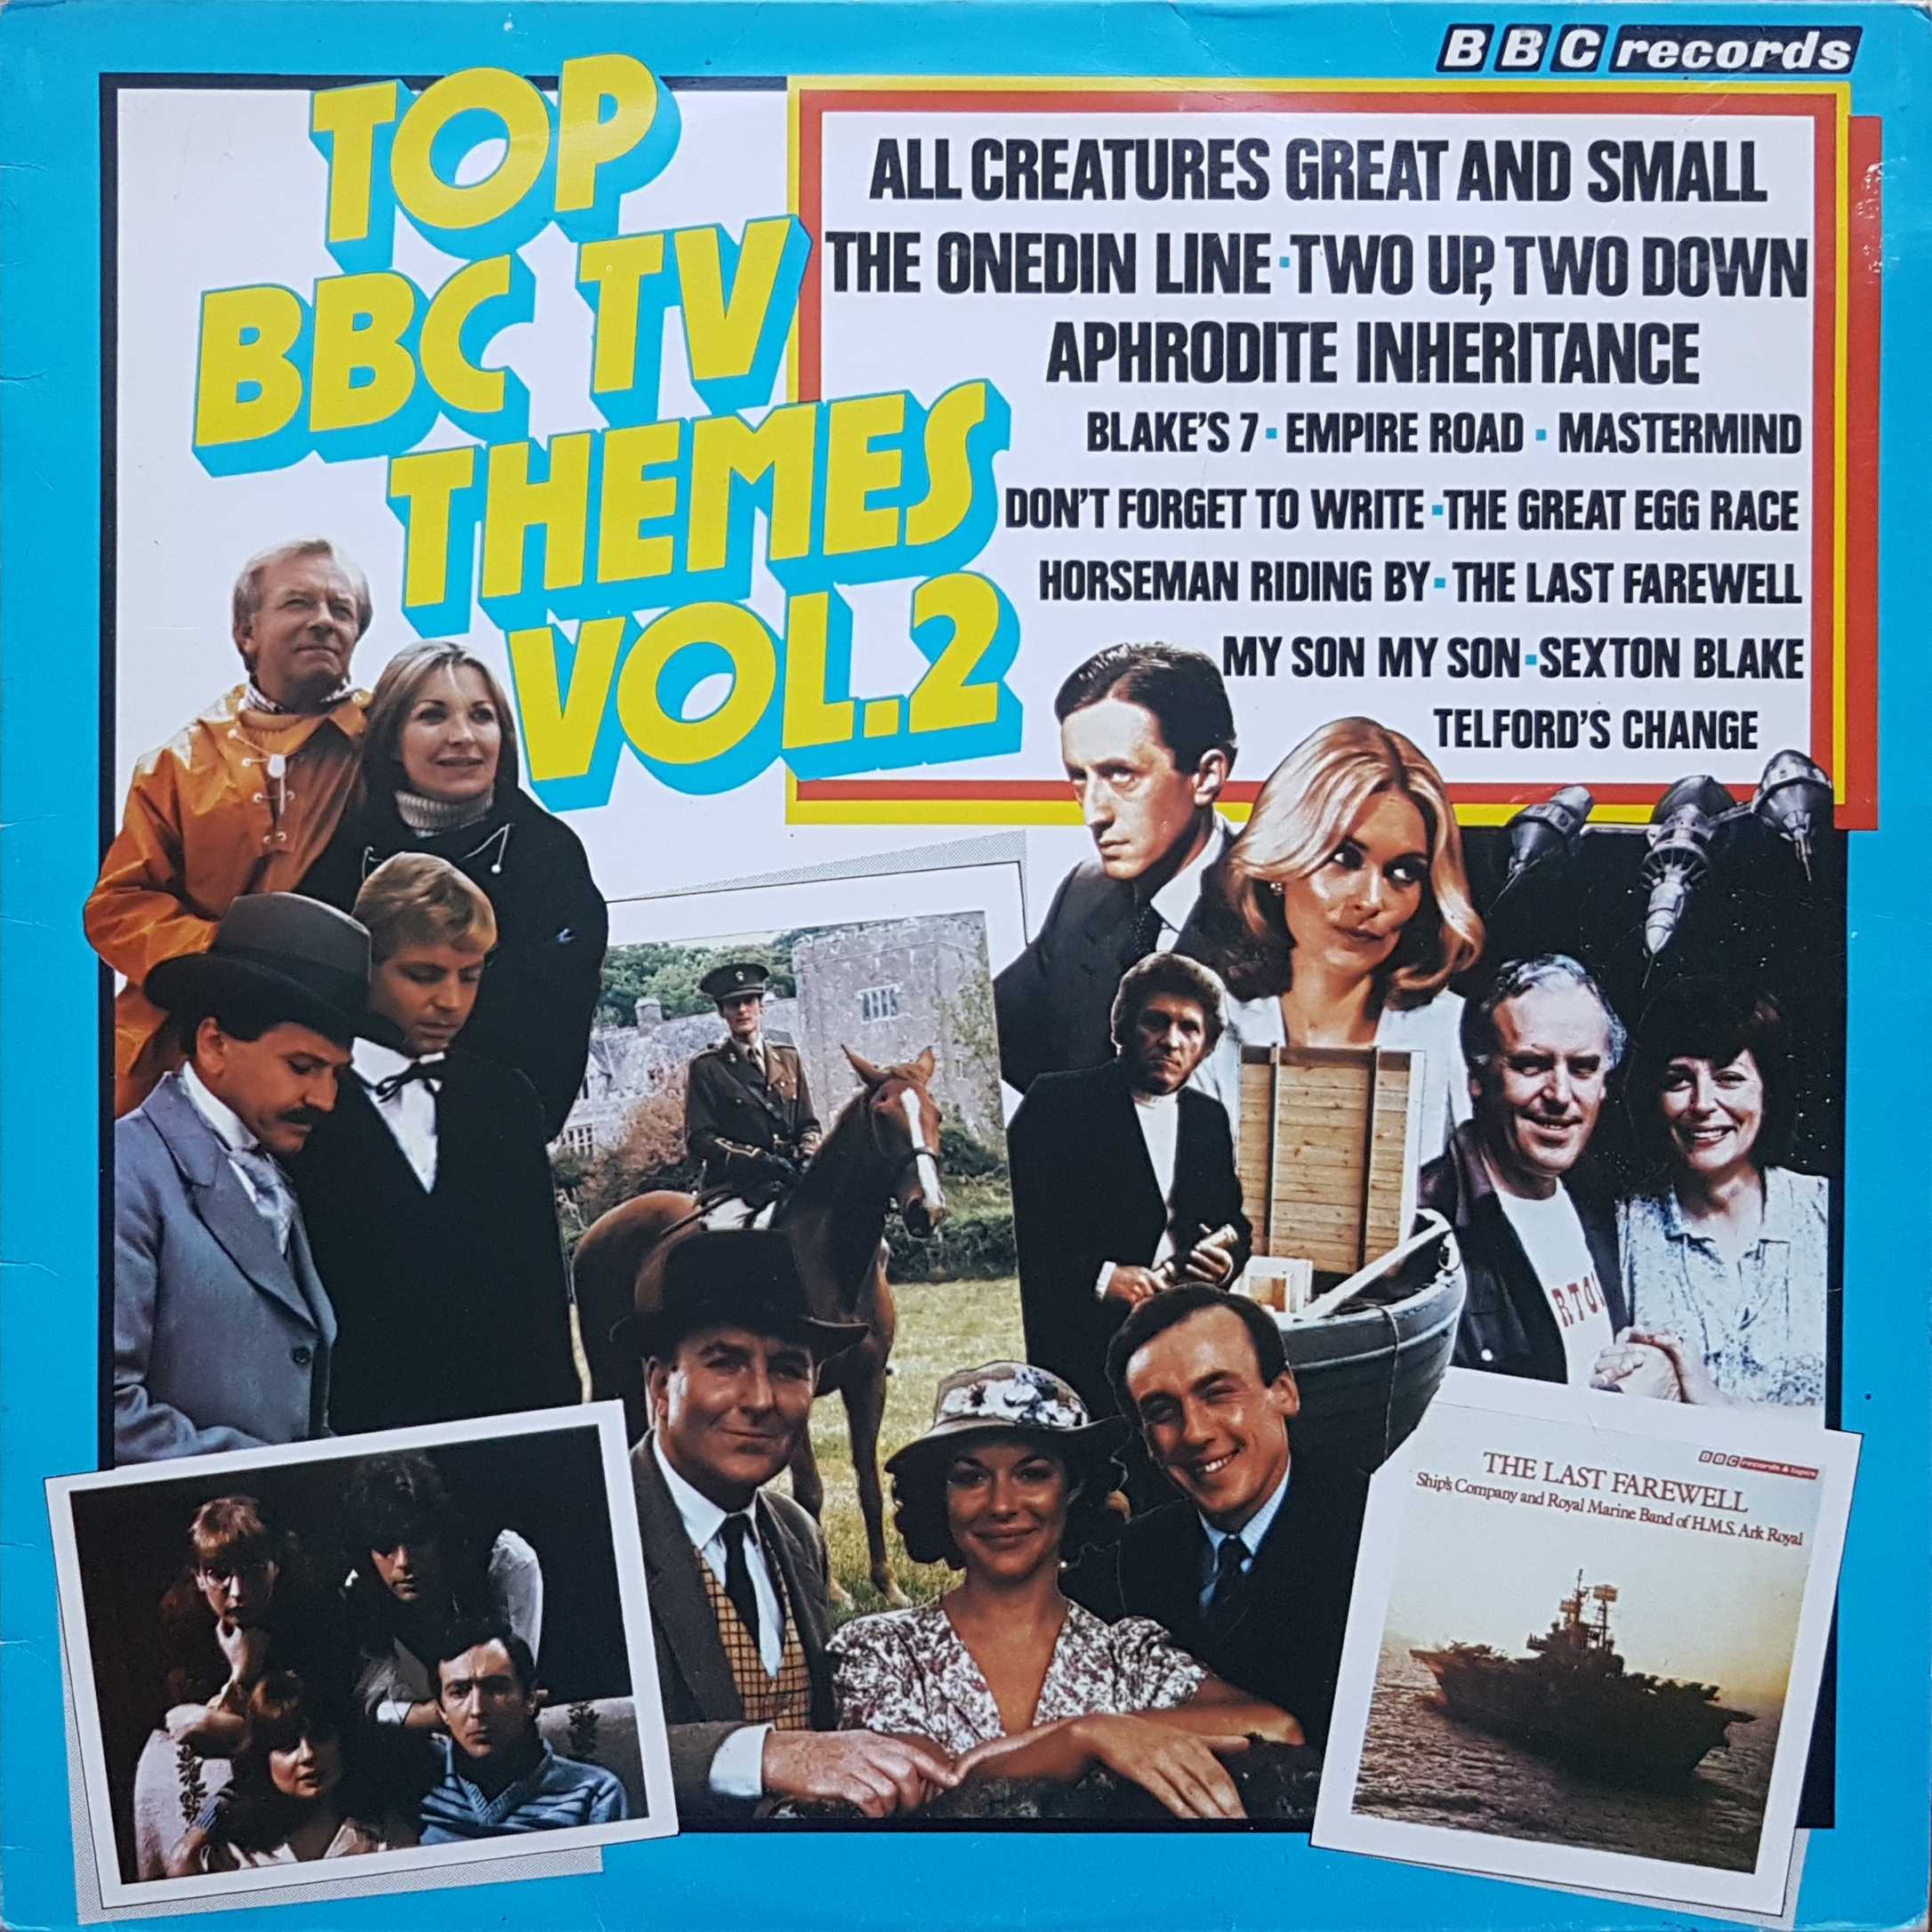 Picture of REH 365 Top BBC TV themes - Volume 2 by artist Various from the BBC albums - Records and Tapes library